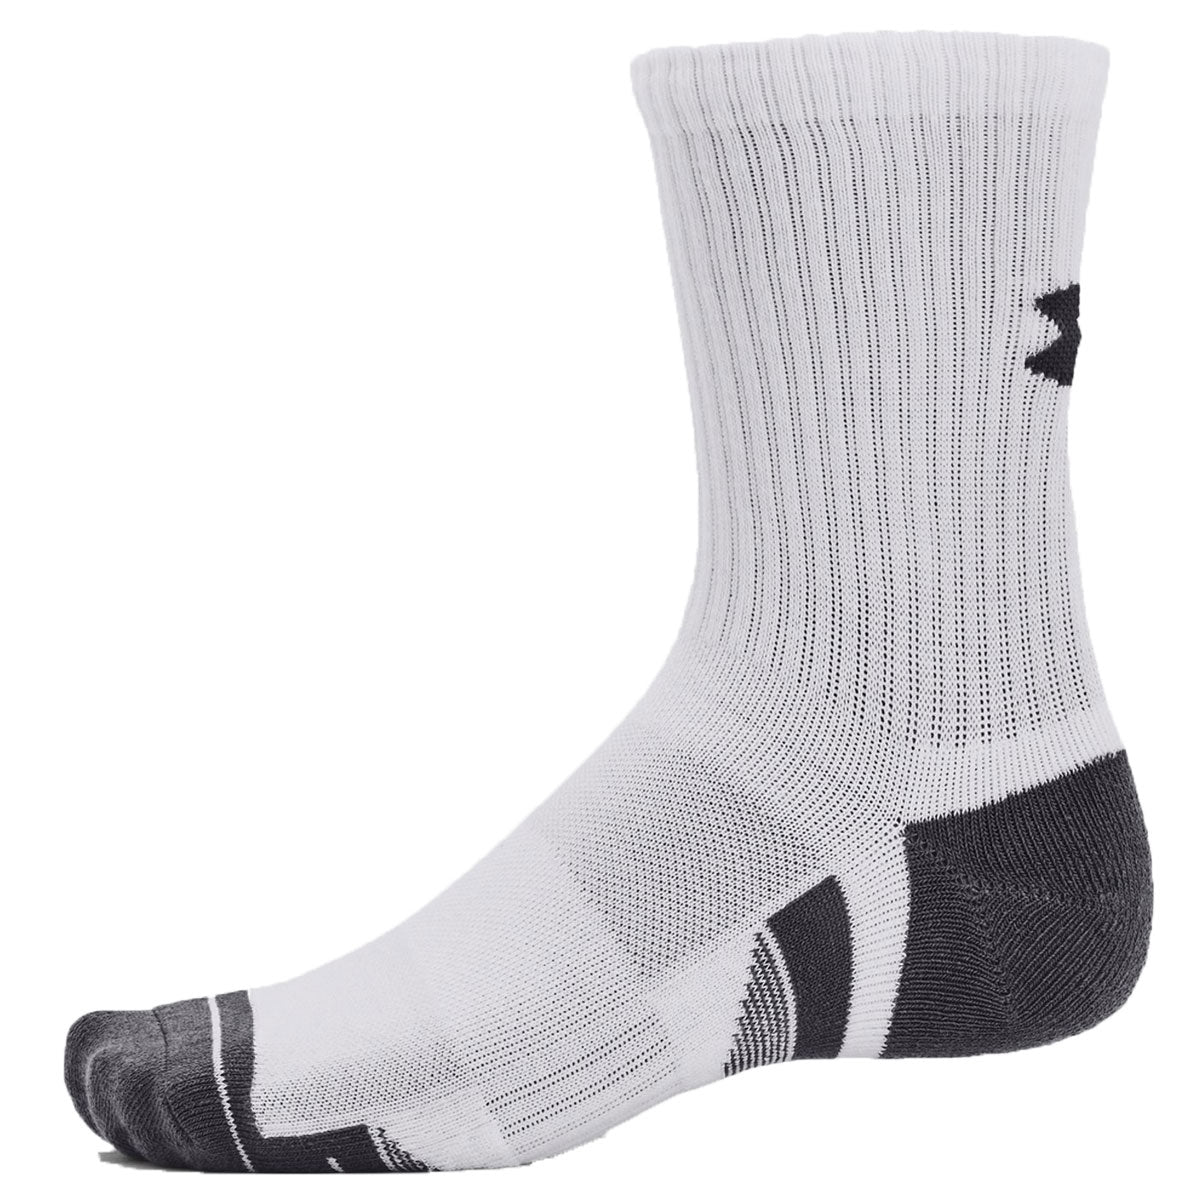 Under Armour Performance Cotton 3 Pack Mid Socks - Adult - White/Pitch Grey